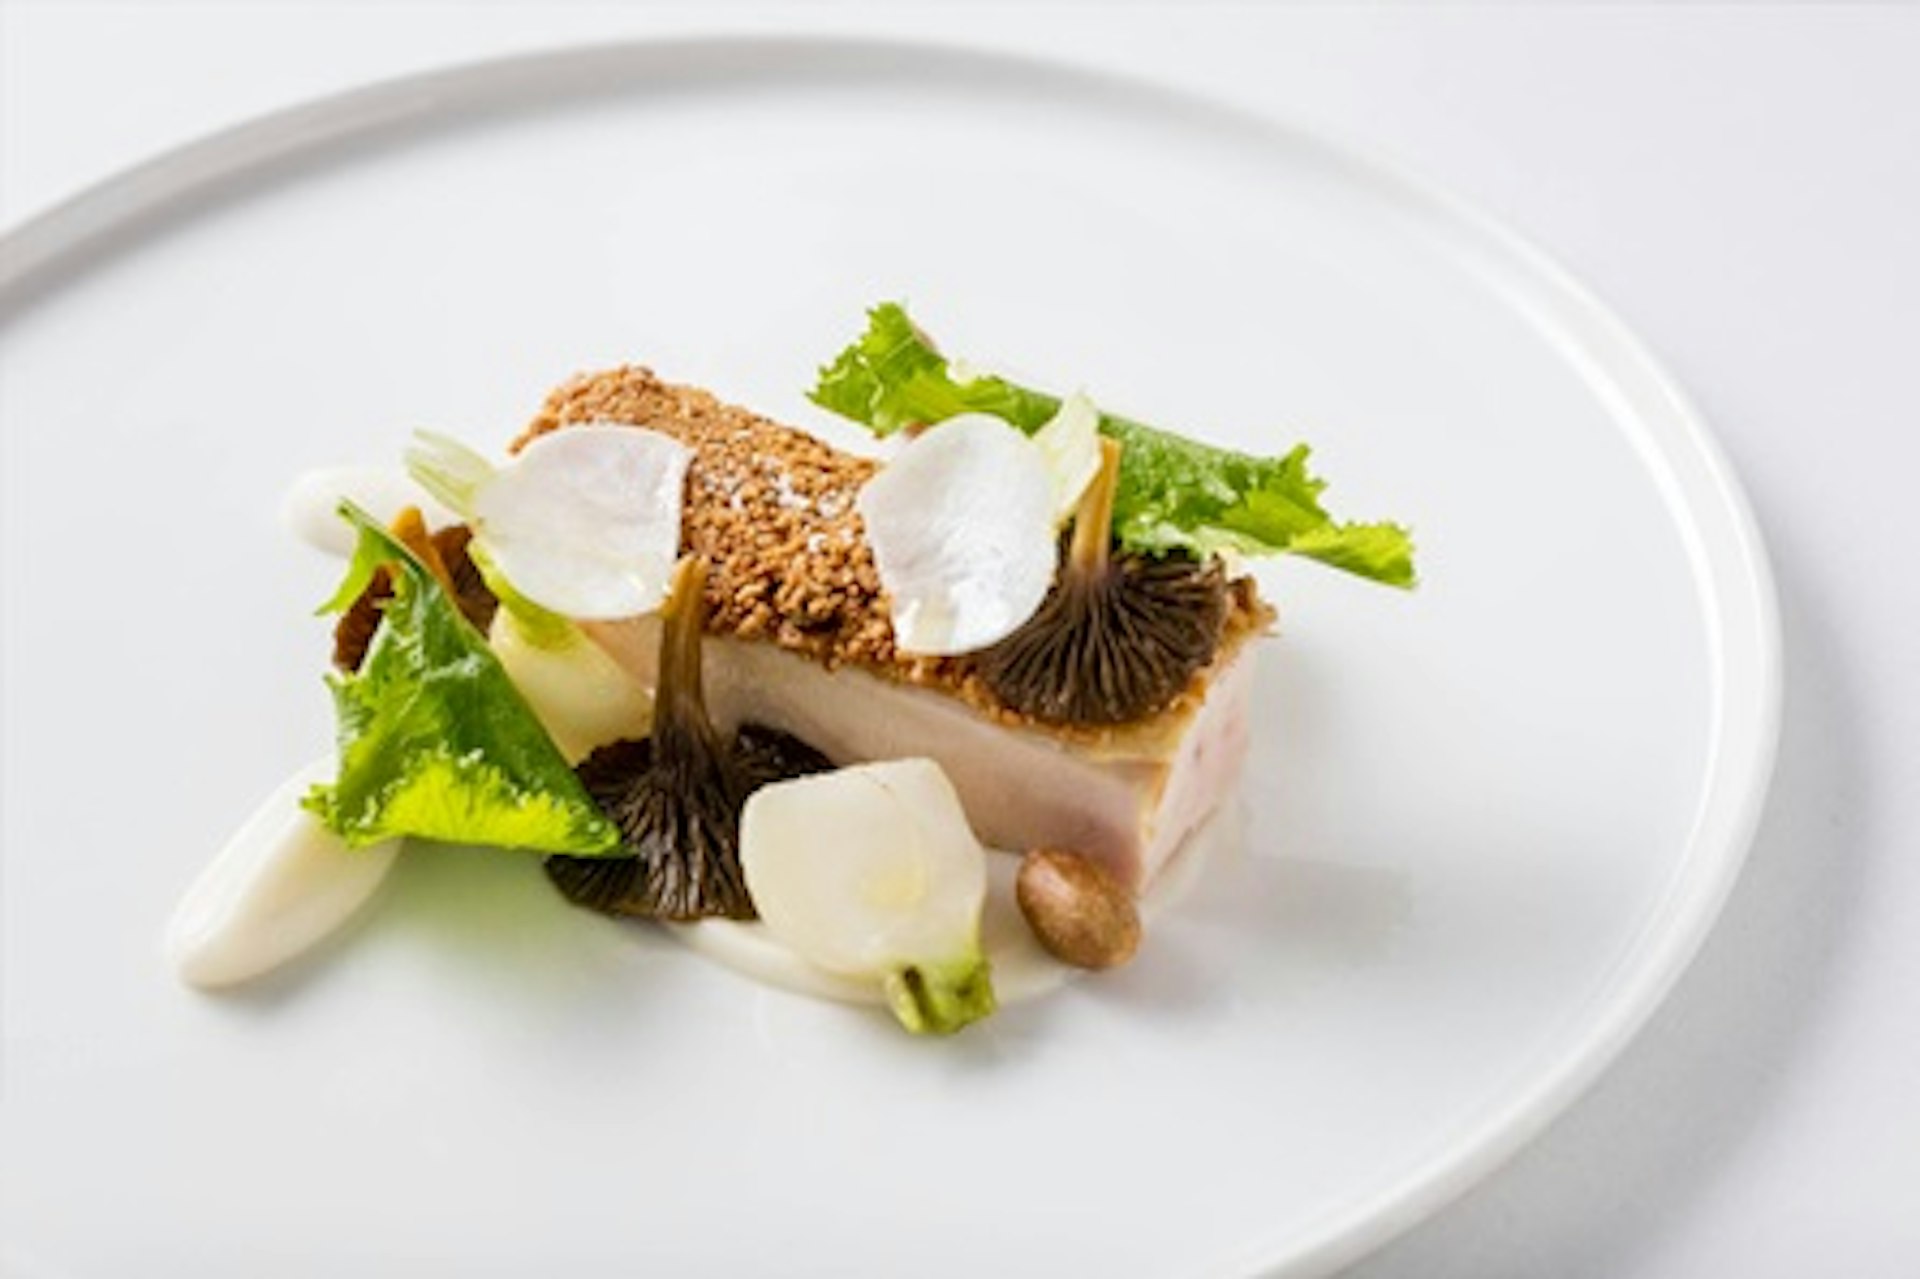 Fine Dining Three Course Lunch for Two at Launceston Place, Kensington 3